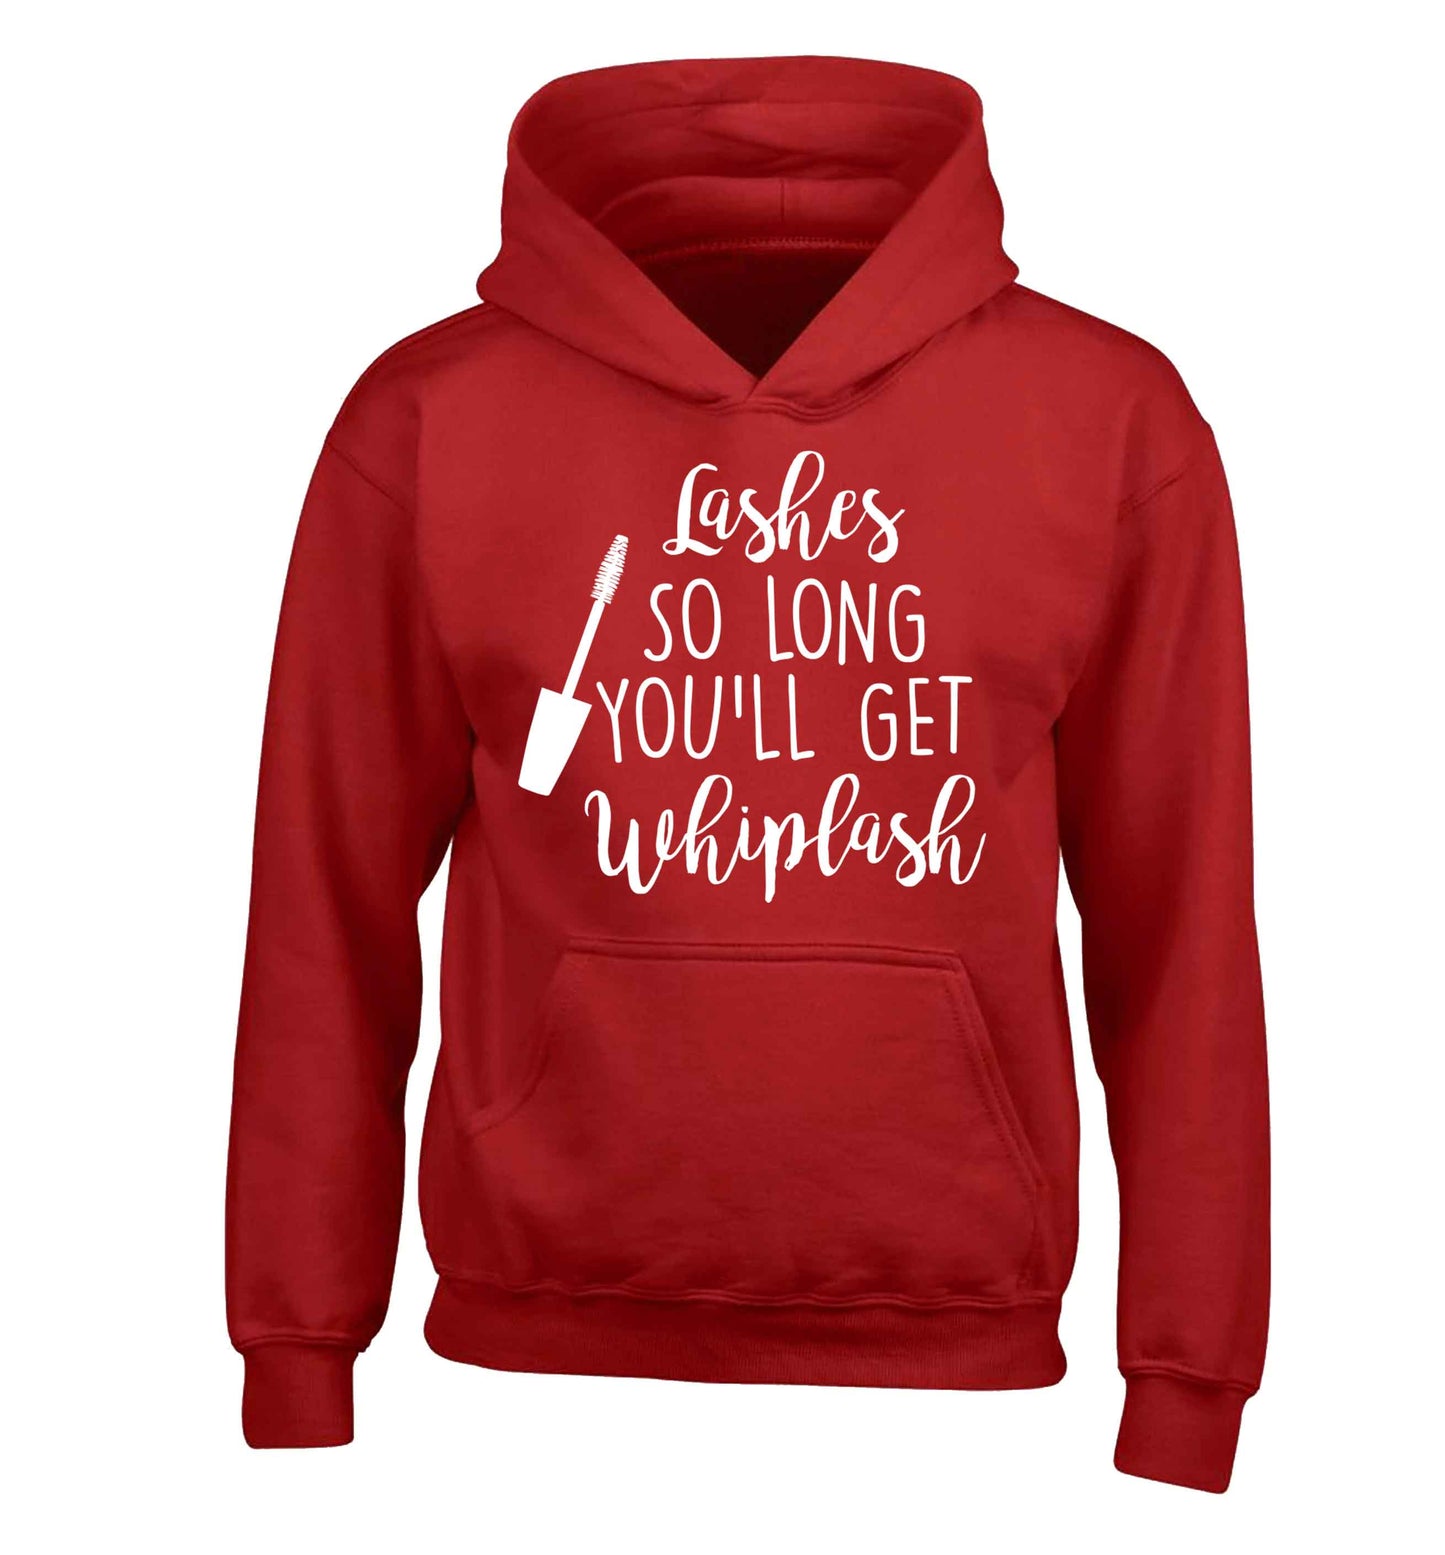 Lashes so long you'll get whiplash children's red hoodie 12-13 Years